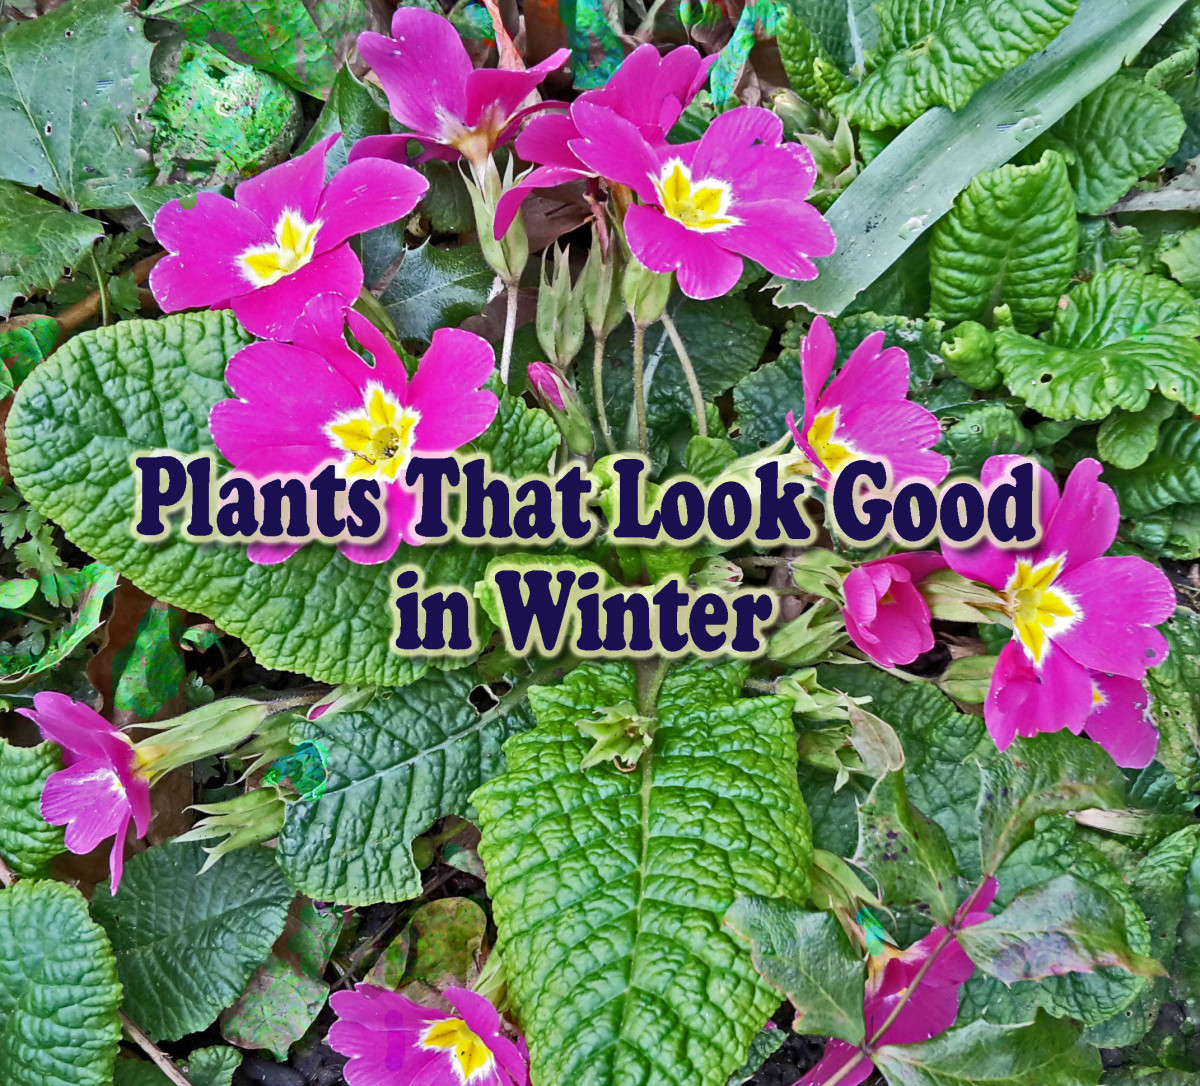 Although many plants are past their prime in the winter months, there are several that flower or have colourful foliage during this season.